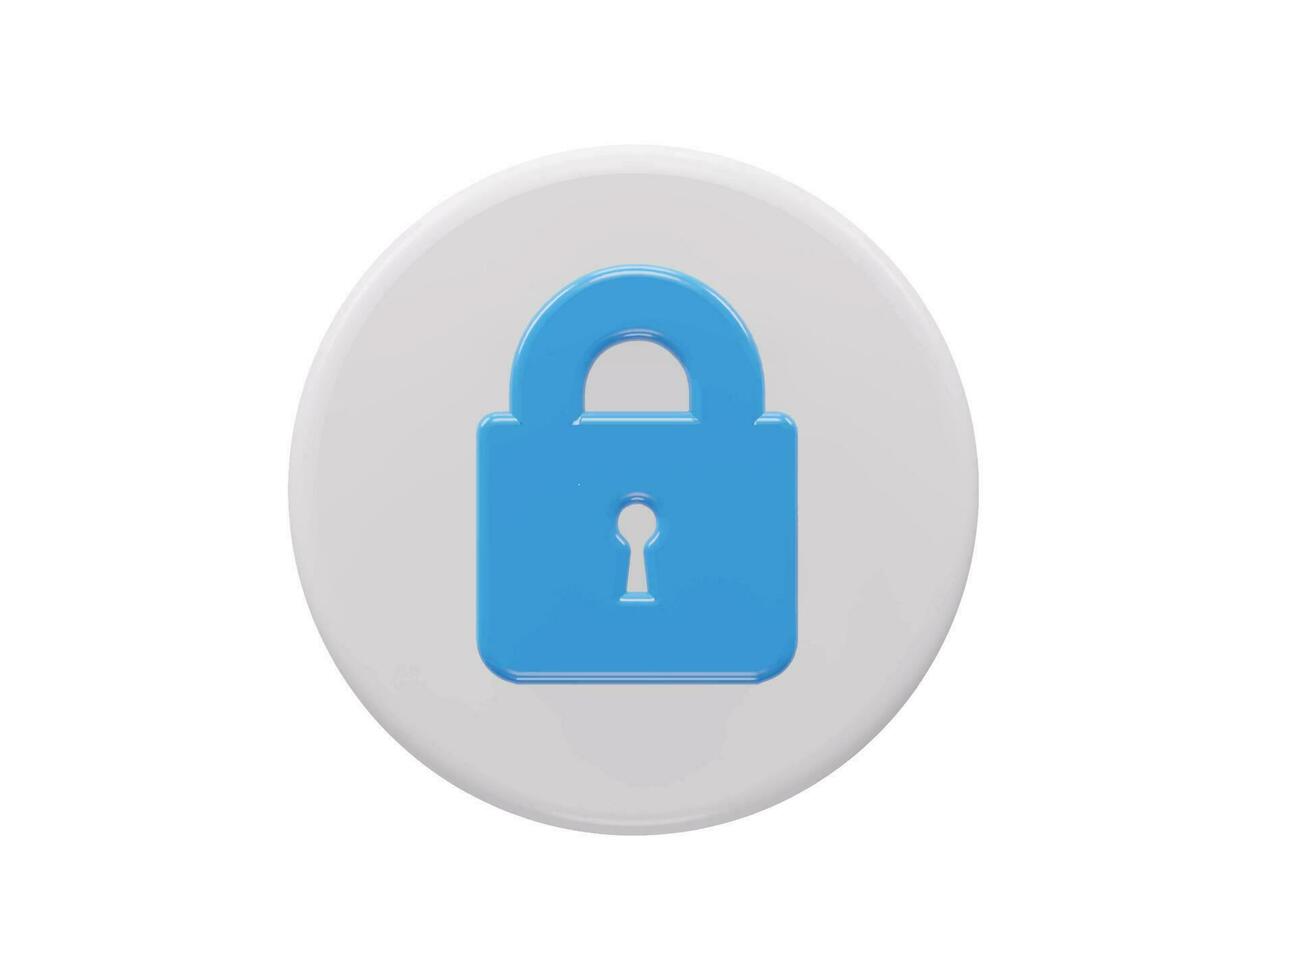 Security icon 3d render element vector